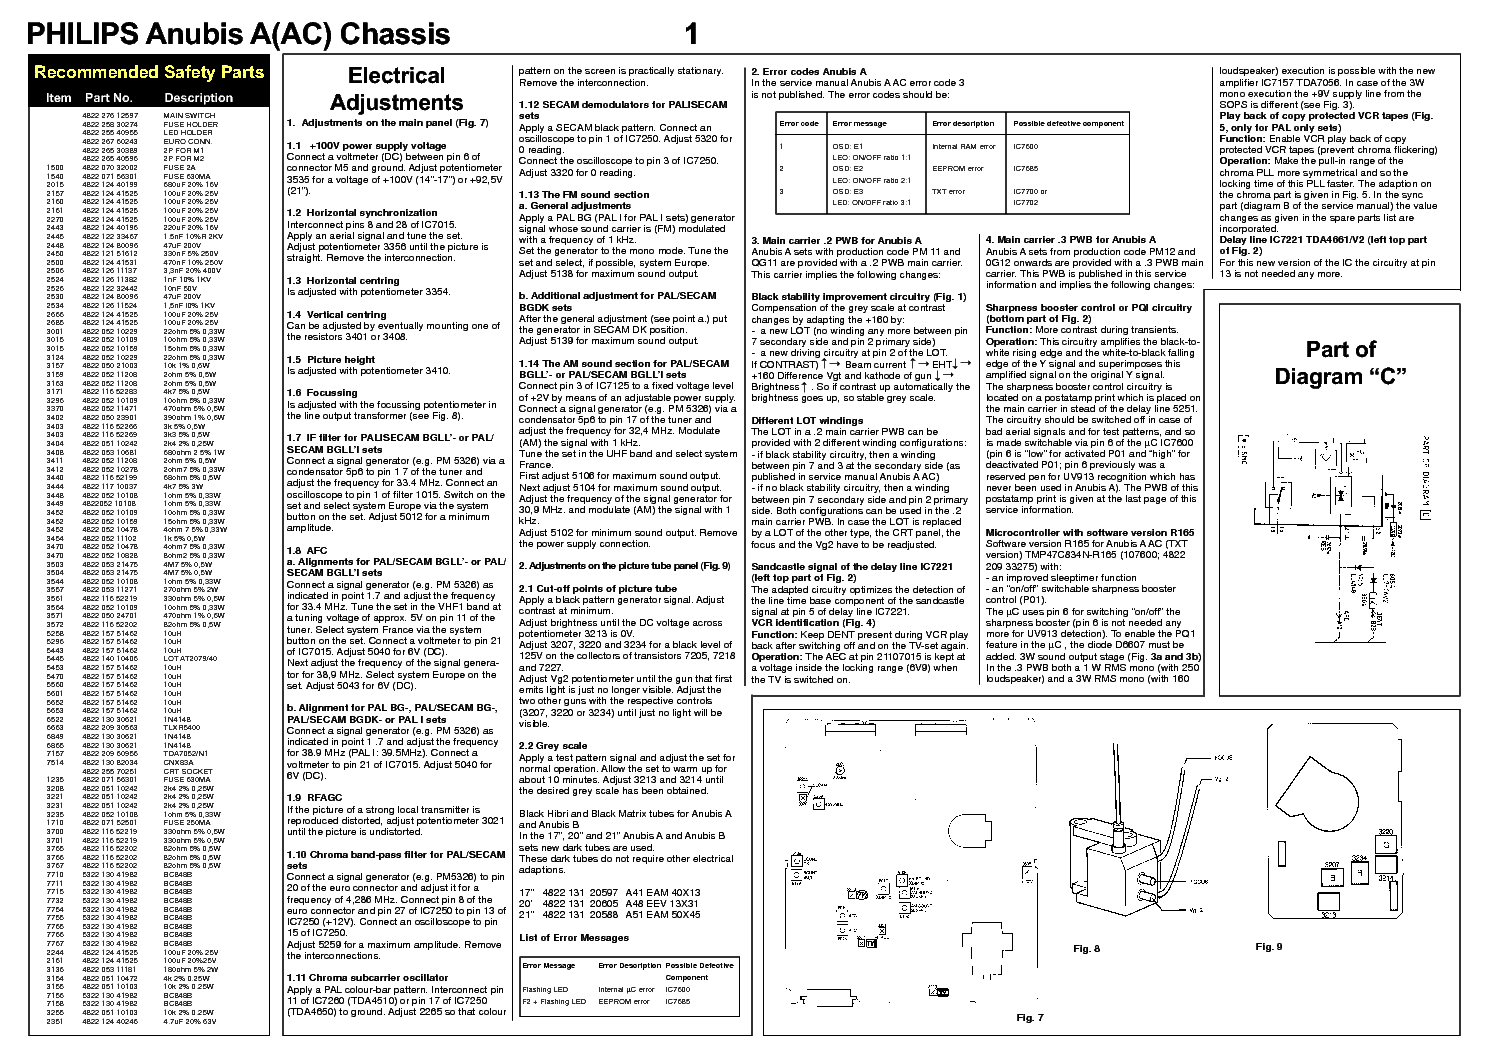 PHILIPS CHASSIS ANUBIS A-AC service manual (1st page)